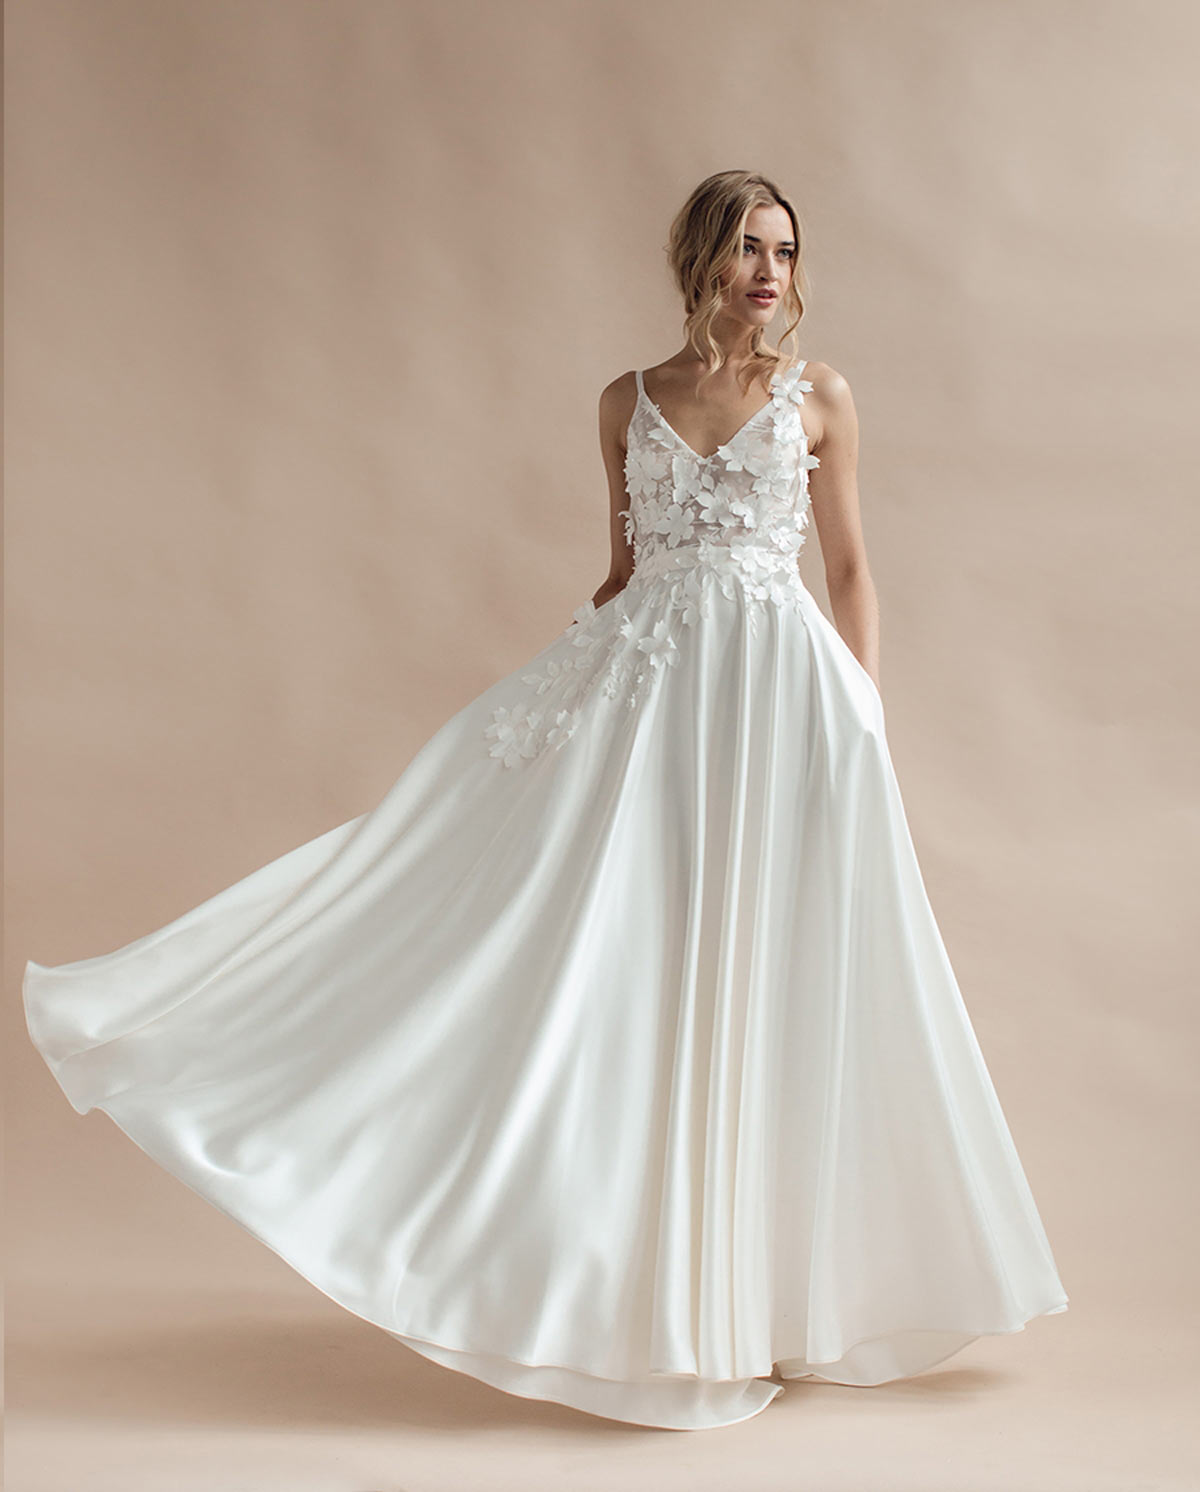 Kate Fearnley coming soon to St Ives Bridal Boutique